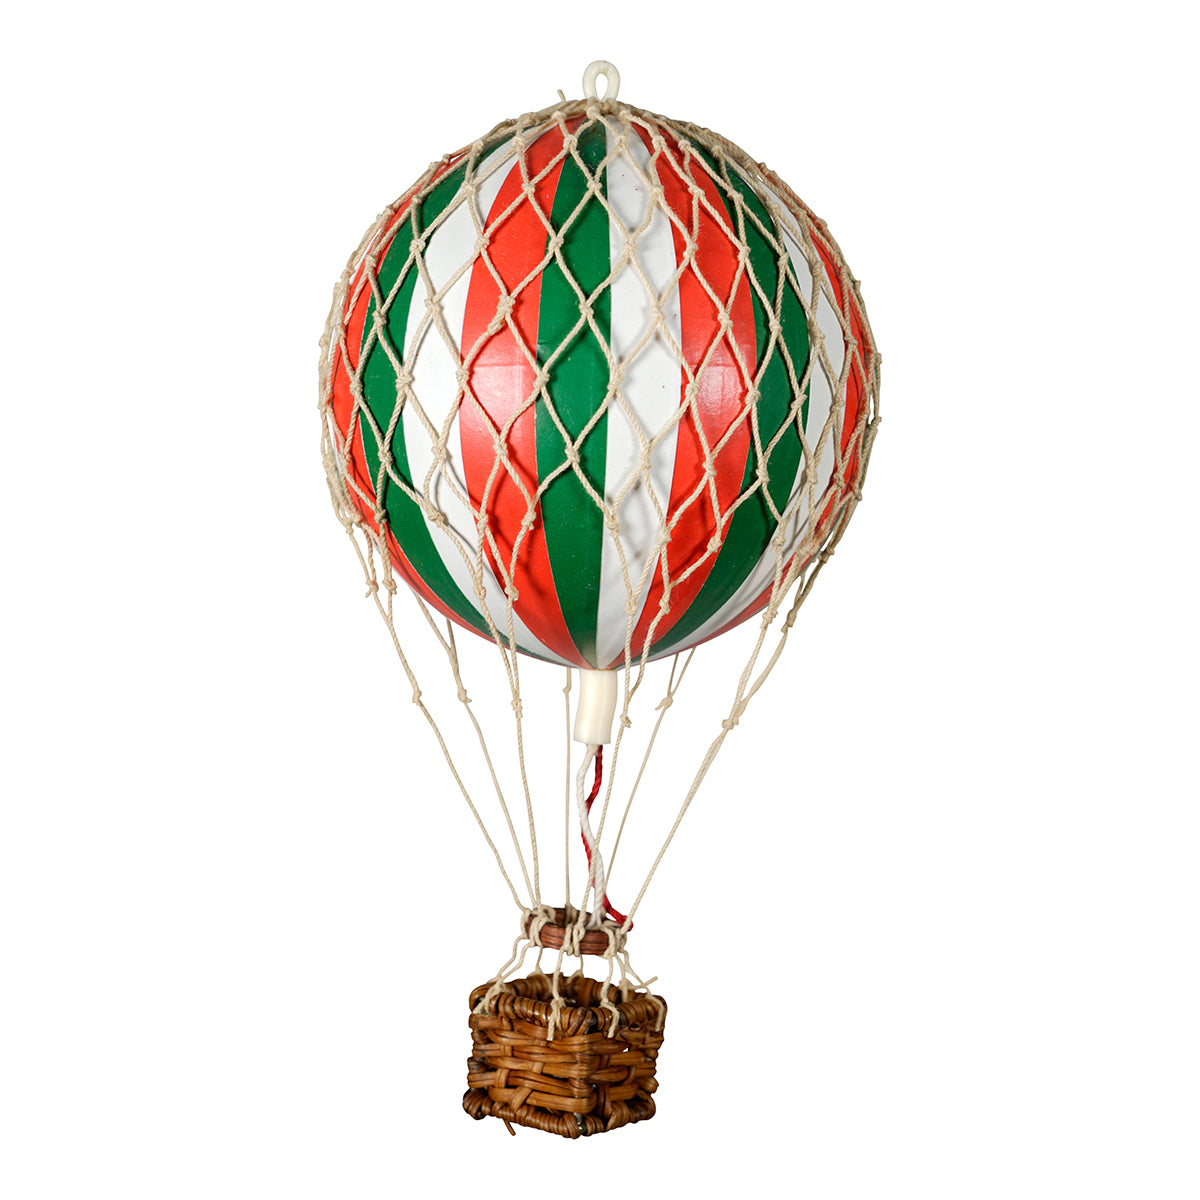 Embark on a whimsical journey through the skies aboard a Wonderen Extra Small Hot Air Balloon - Floating The Skies adorned with vibrant red, green, and white stripes from Wonderen Stroopwafels.